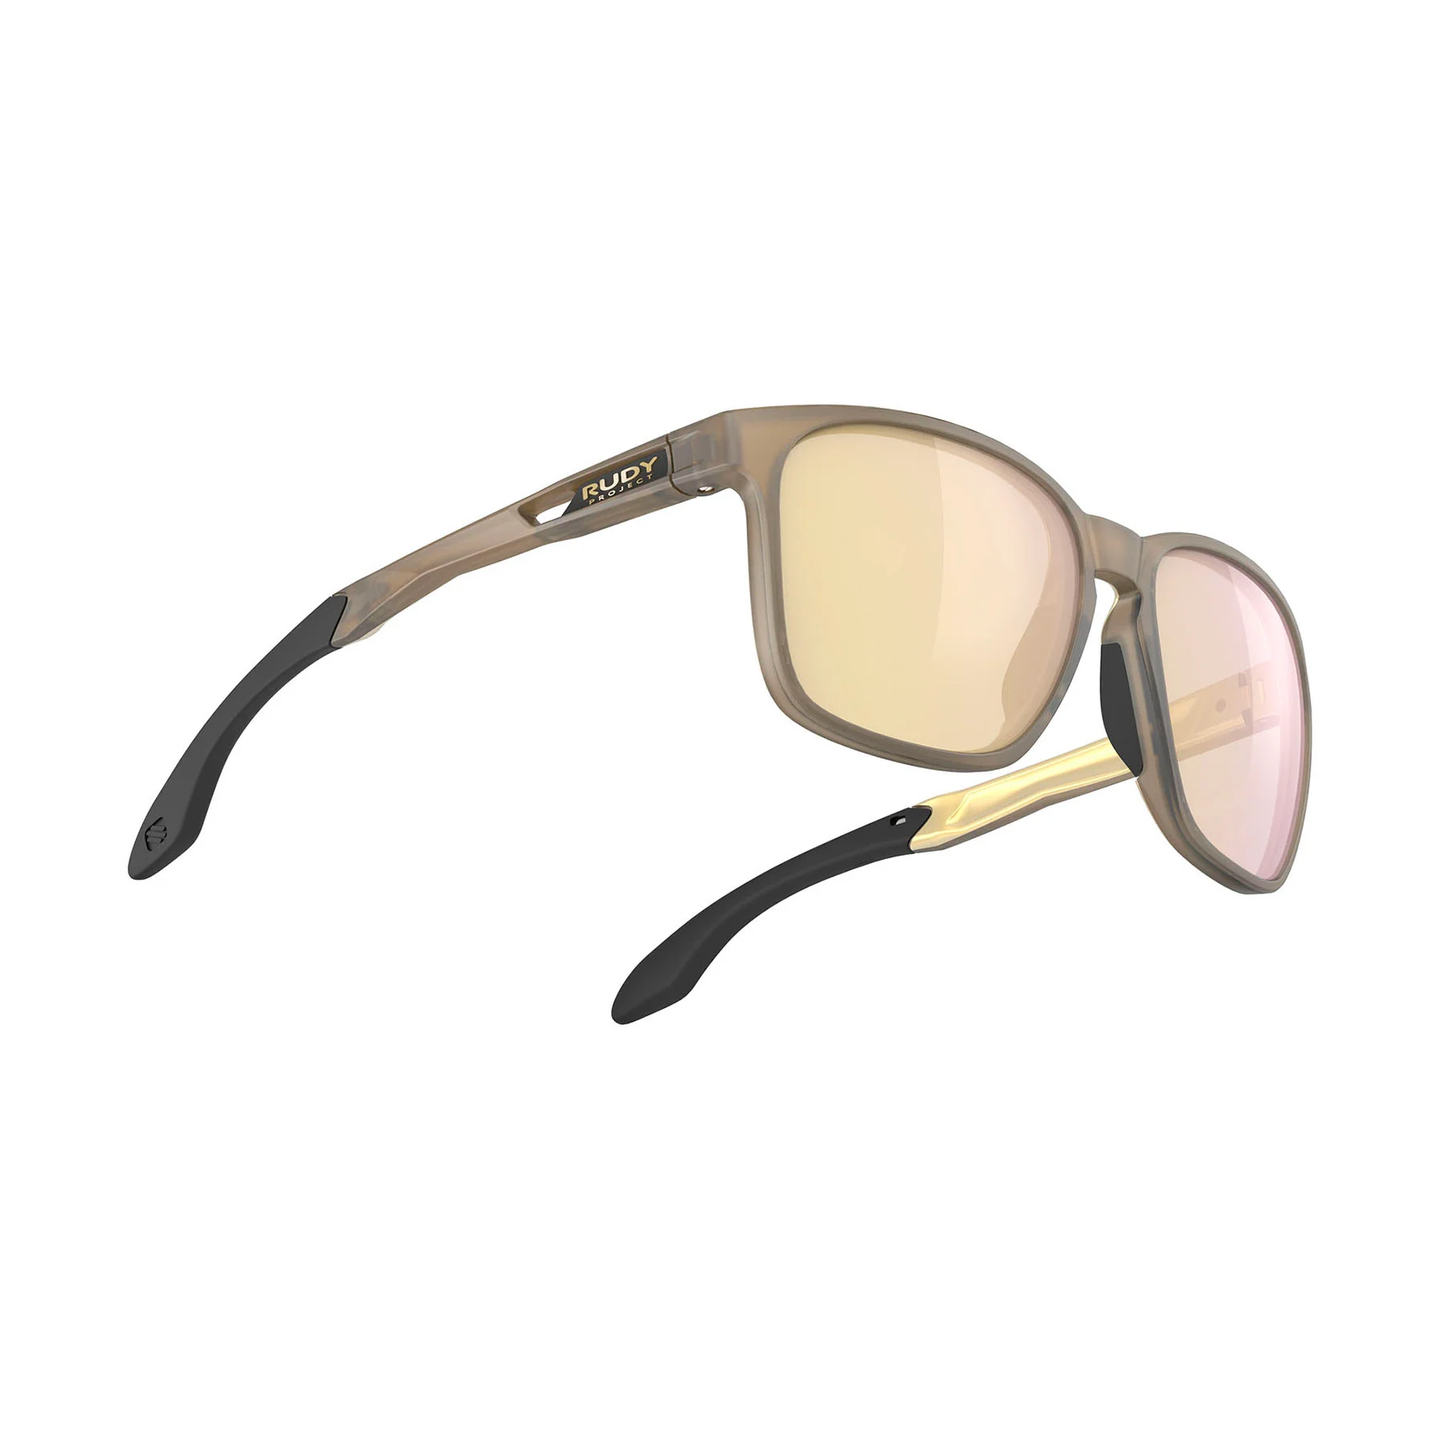 Rudy Project Lifestyle Eyewear Lightflow In Ice Gold Matte  Multilaser Gold